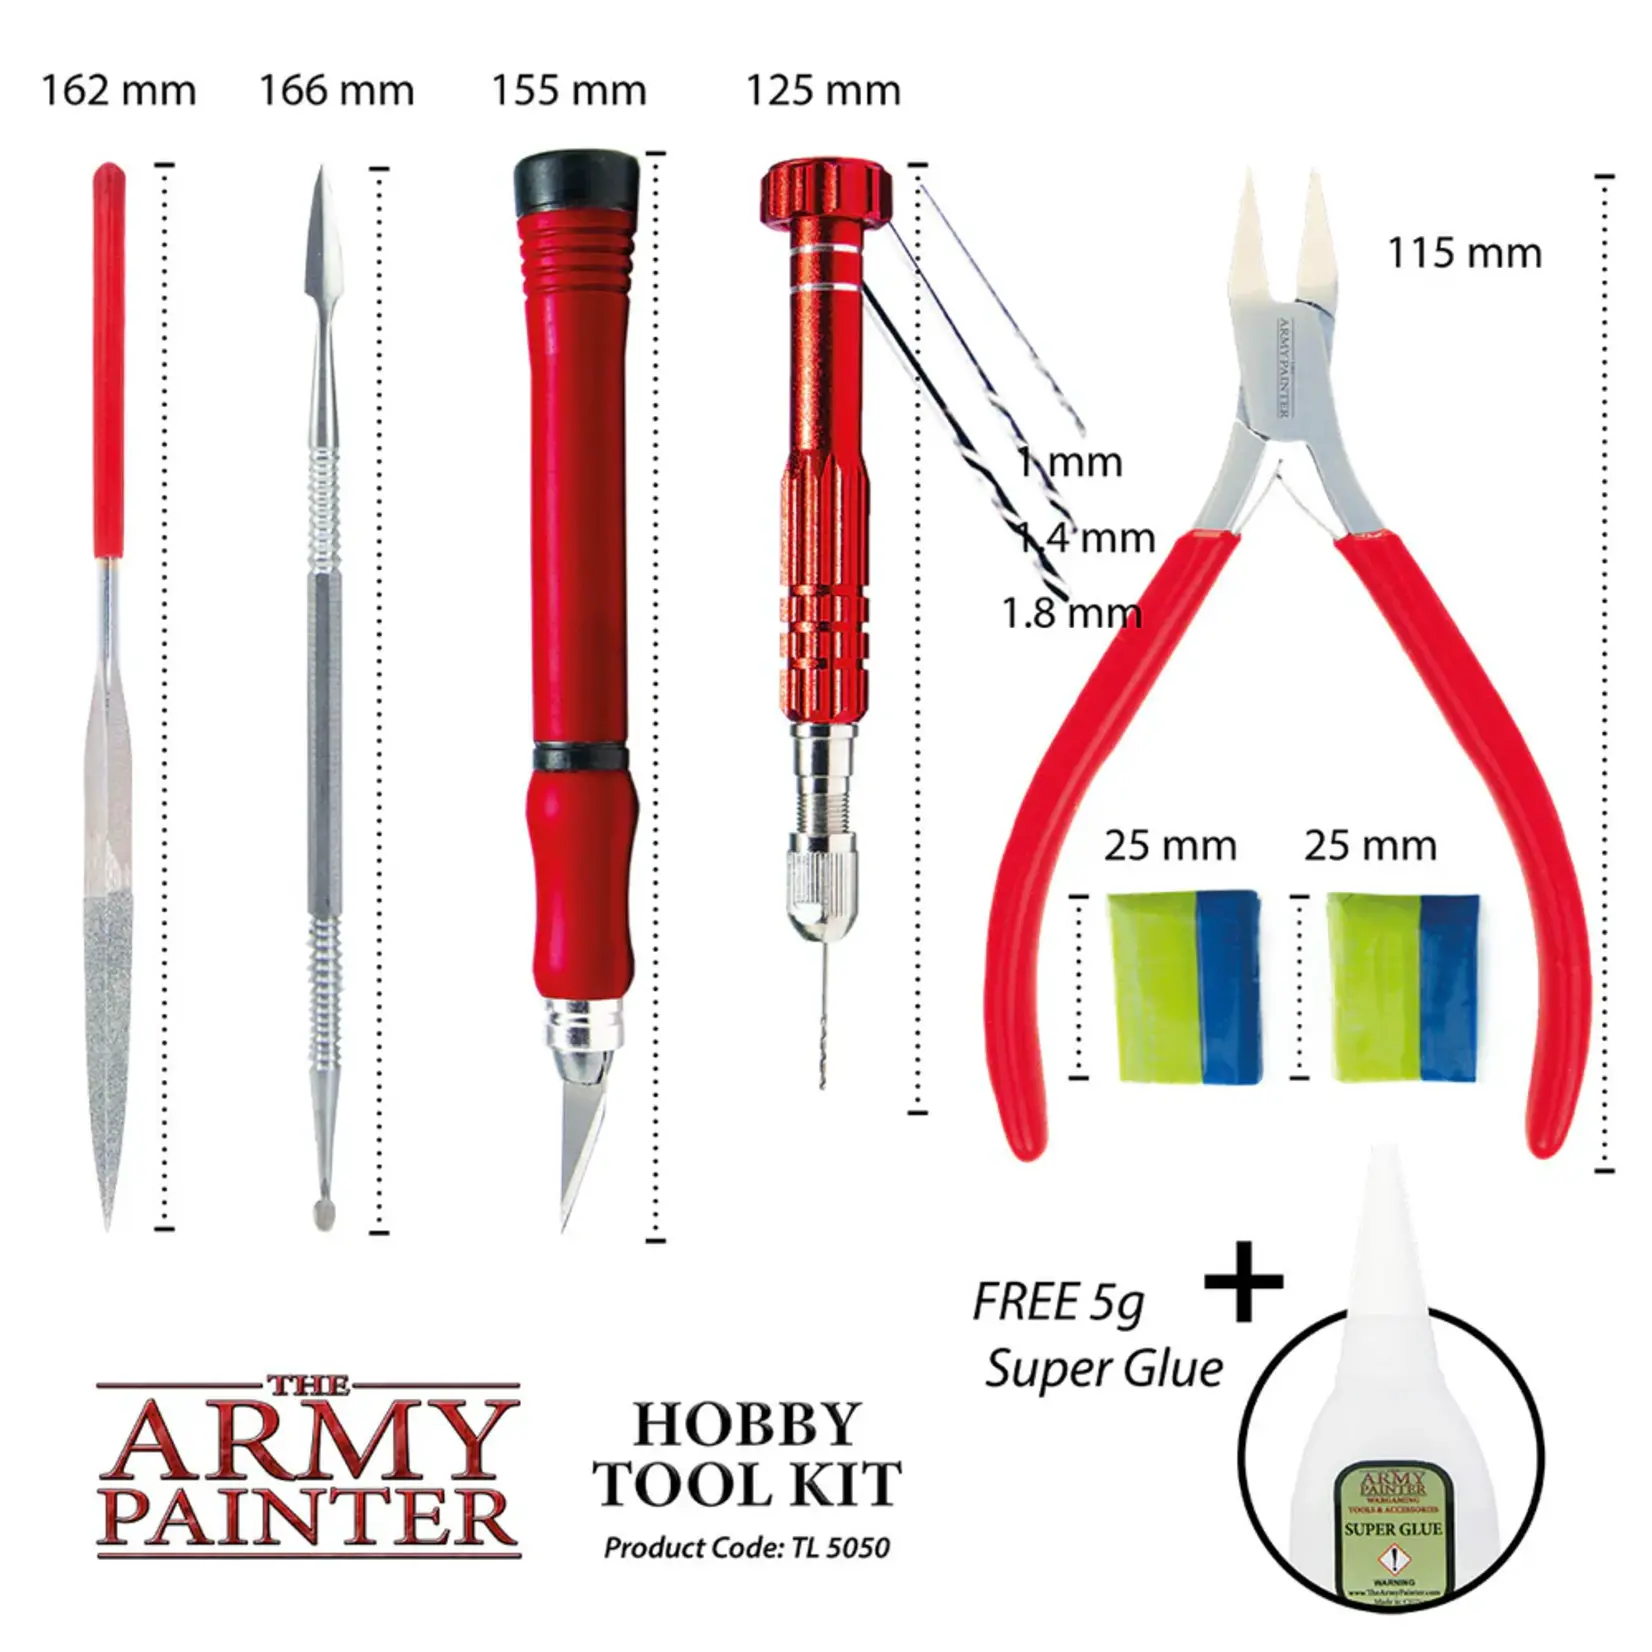 the army painter The Army Painter: Hobby Tool Kit